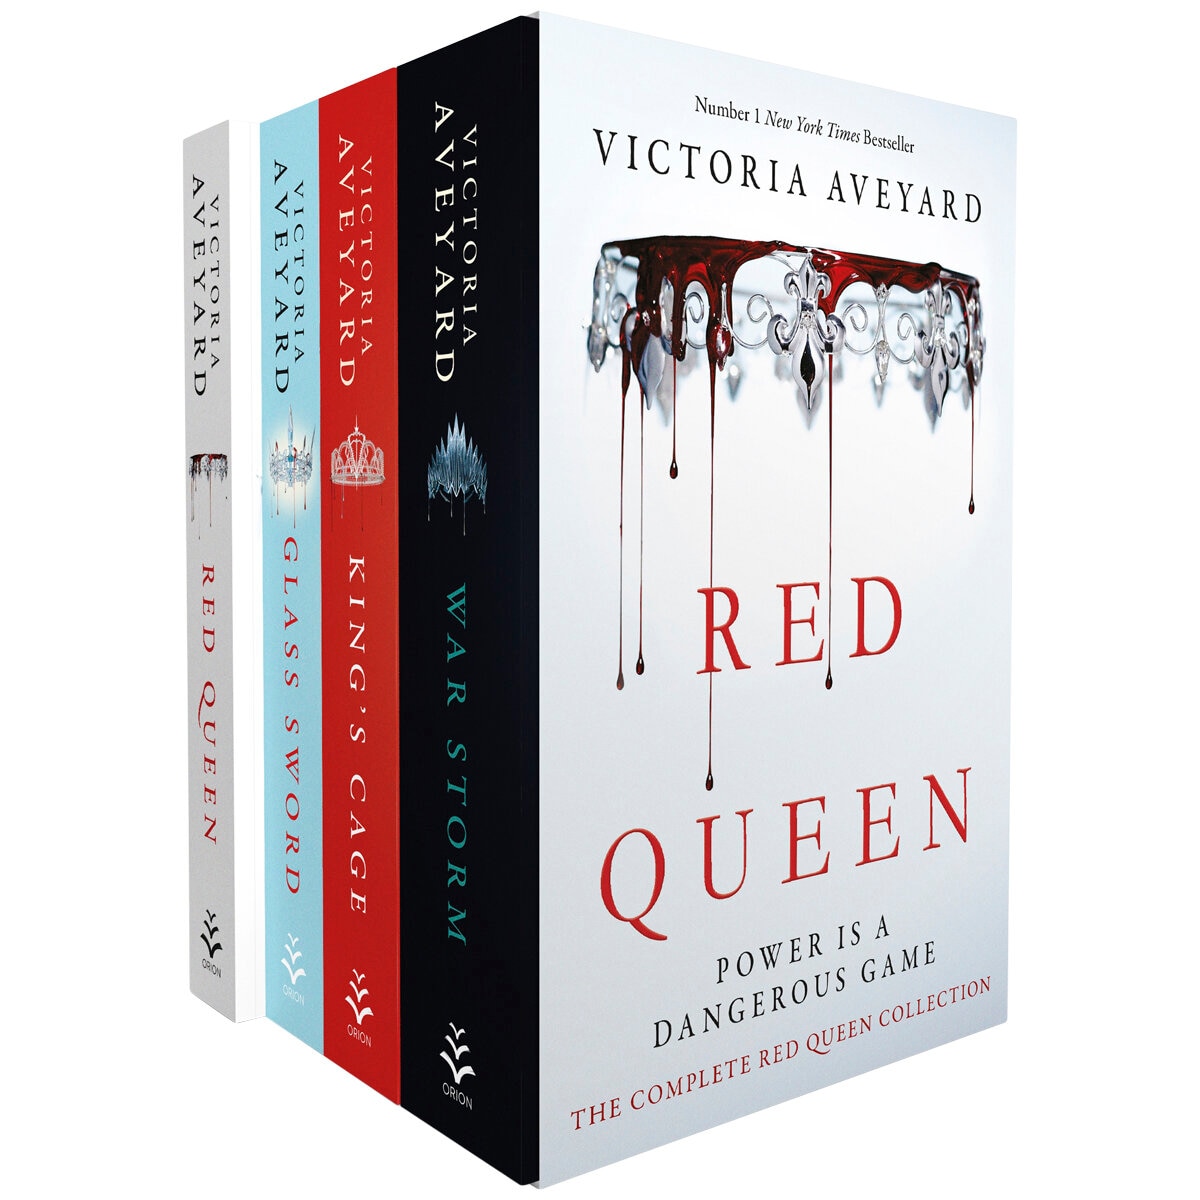 The Complete Red Queen Collection